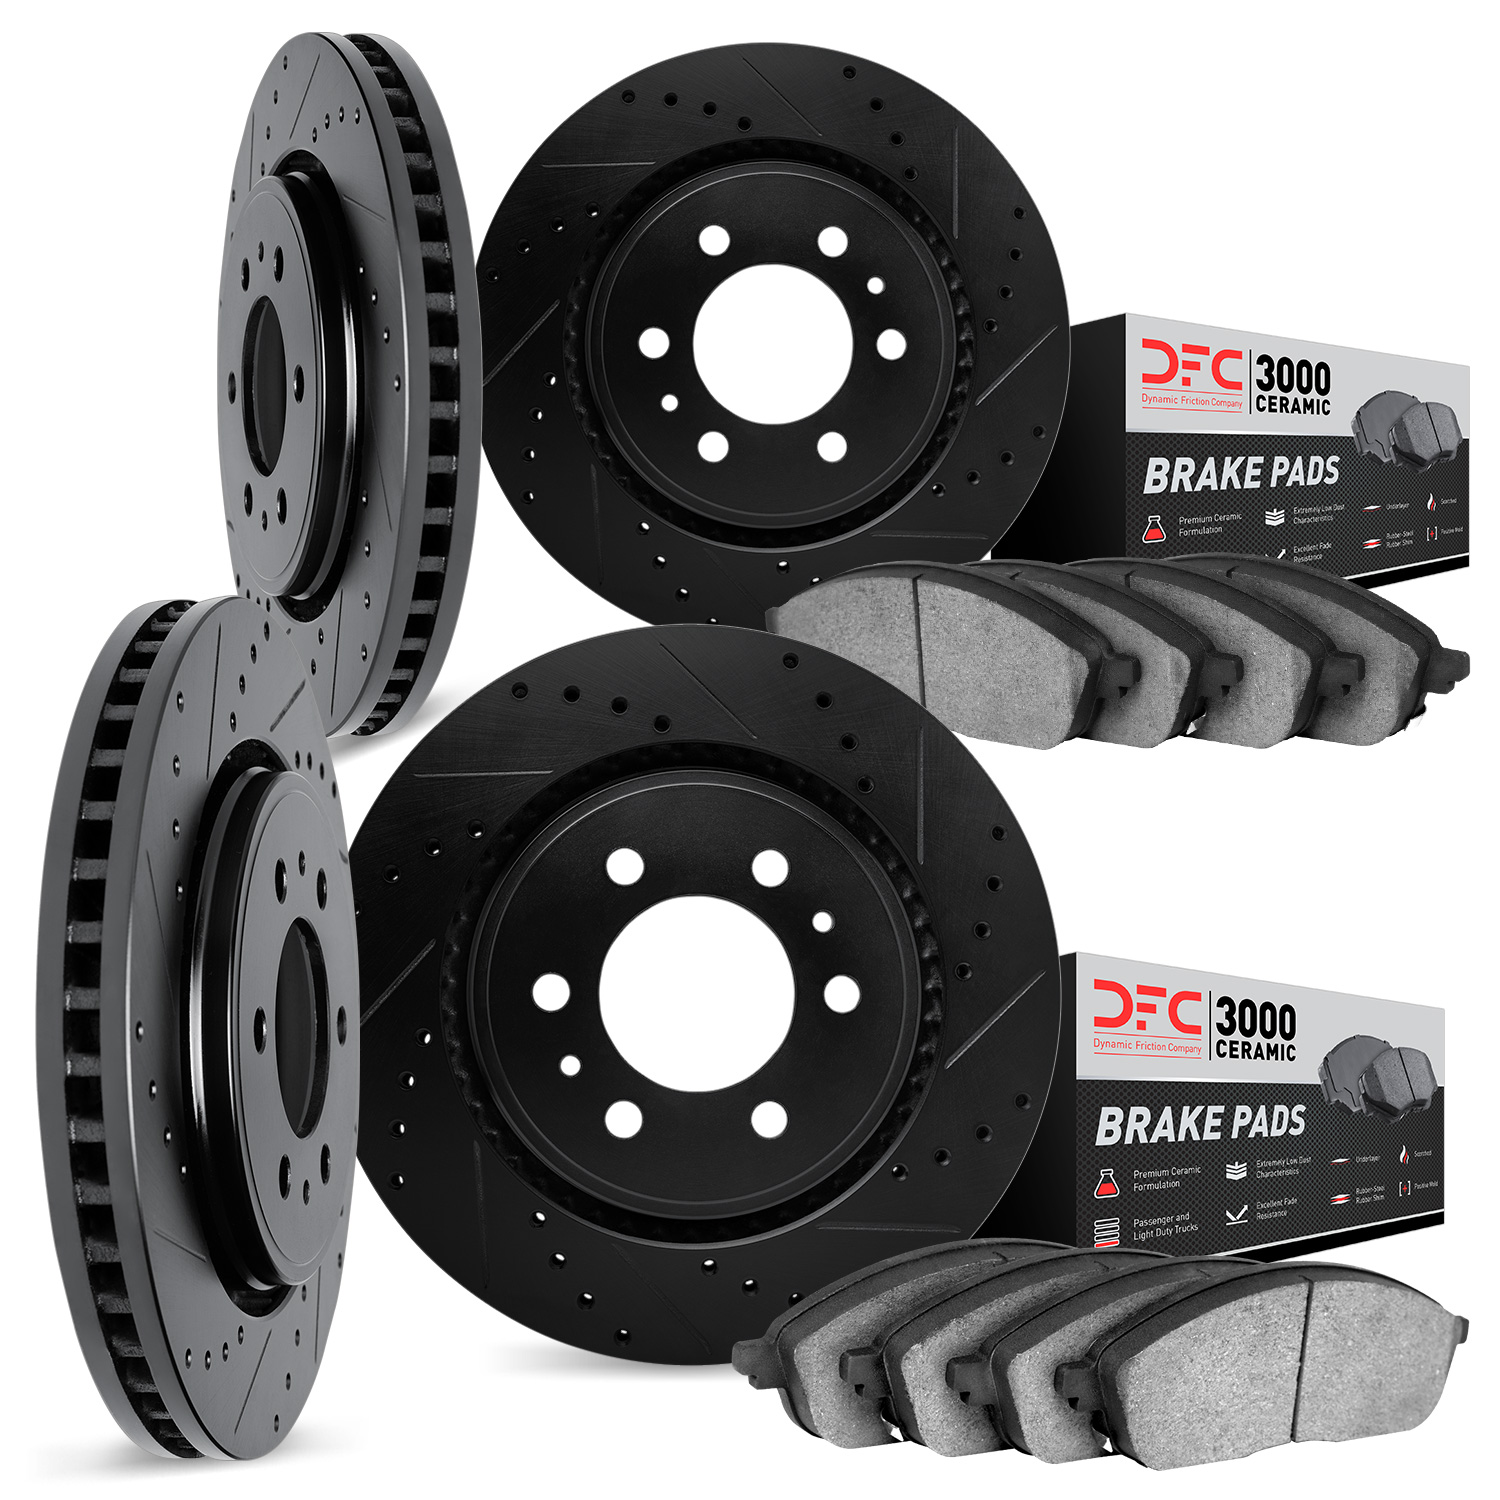 8304-48033 Drilled/Slotted Brake Rotors with 3000-Series Ceramic Brake Pads Kit [Black], 2009-2014 GM, Position: Front and Rear